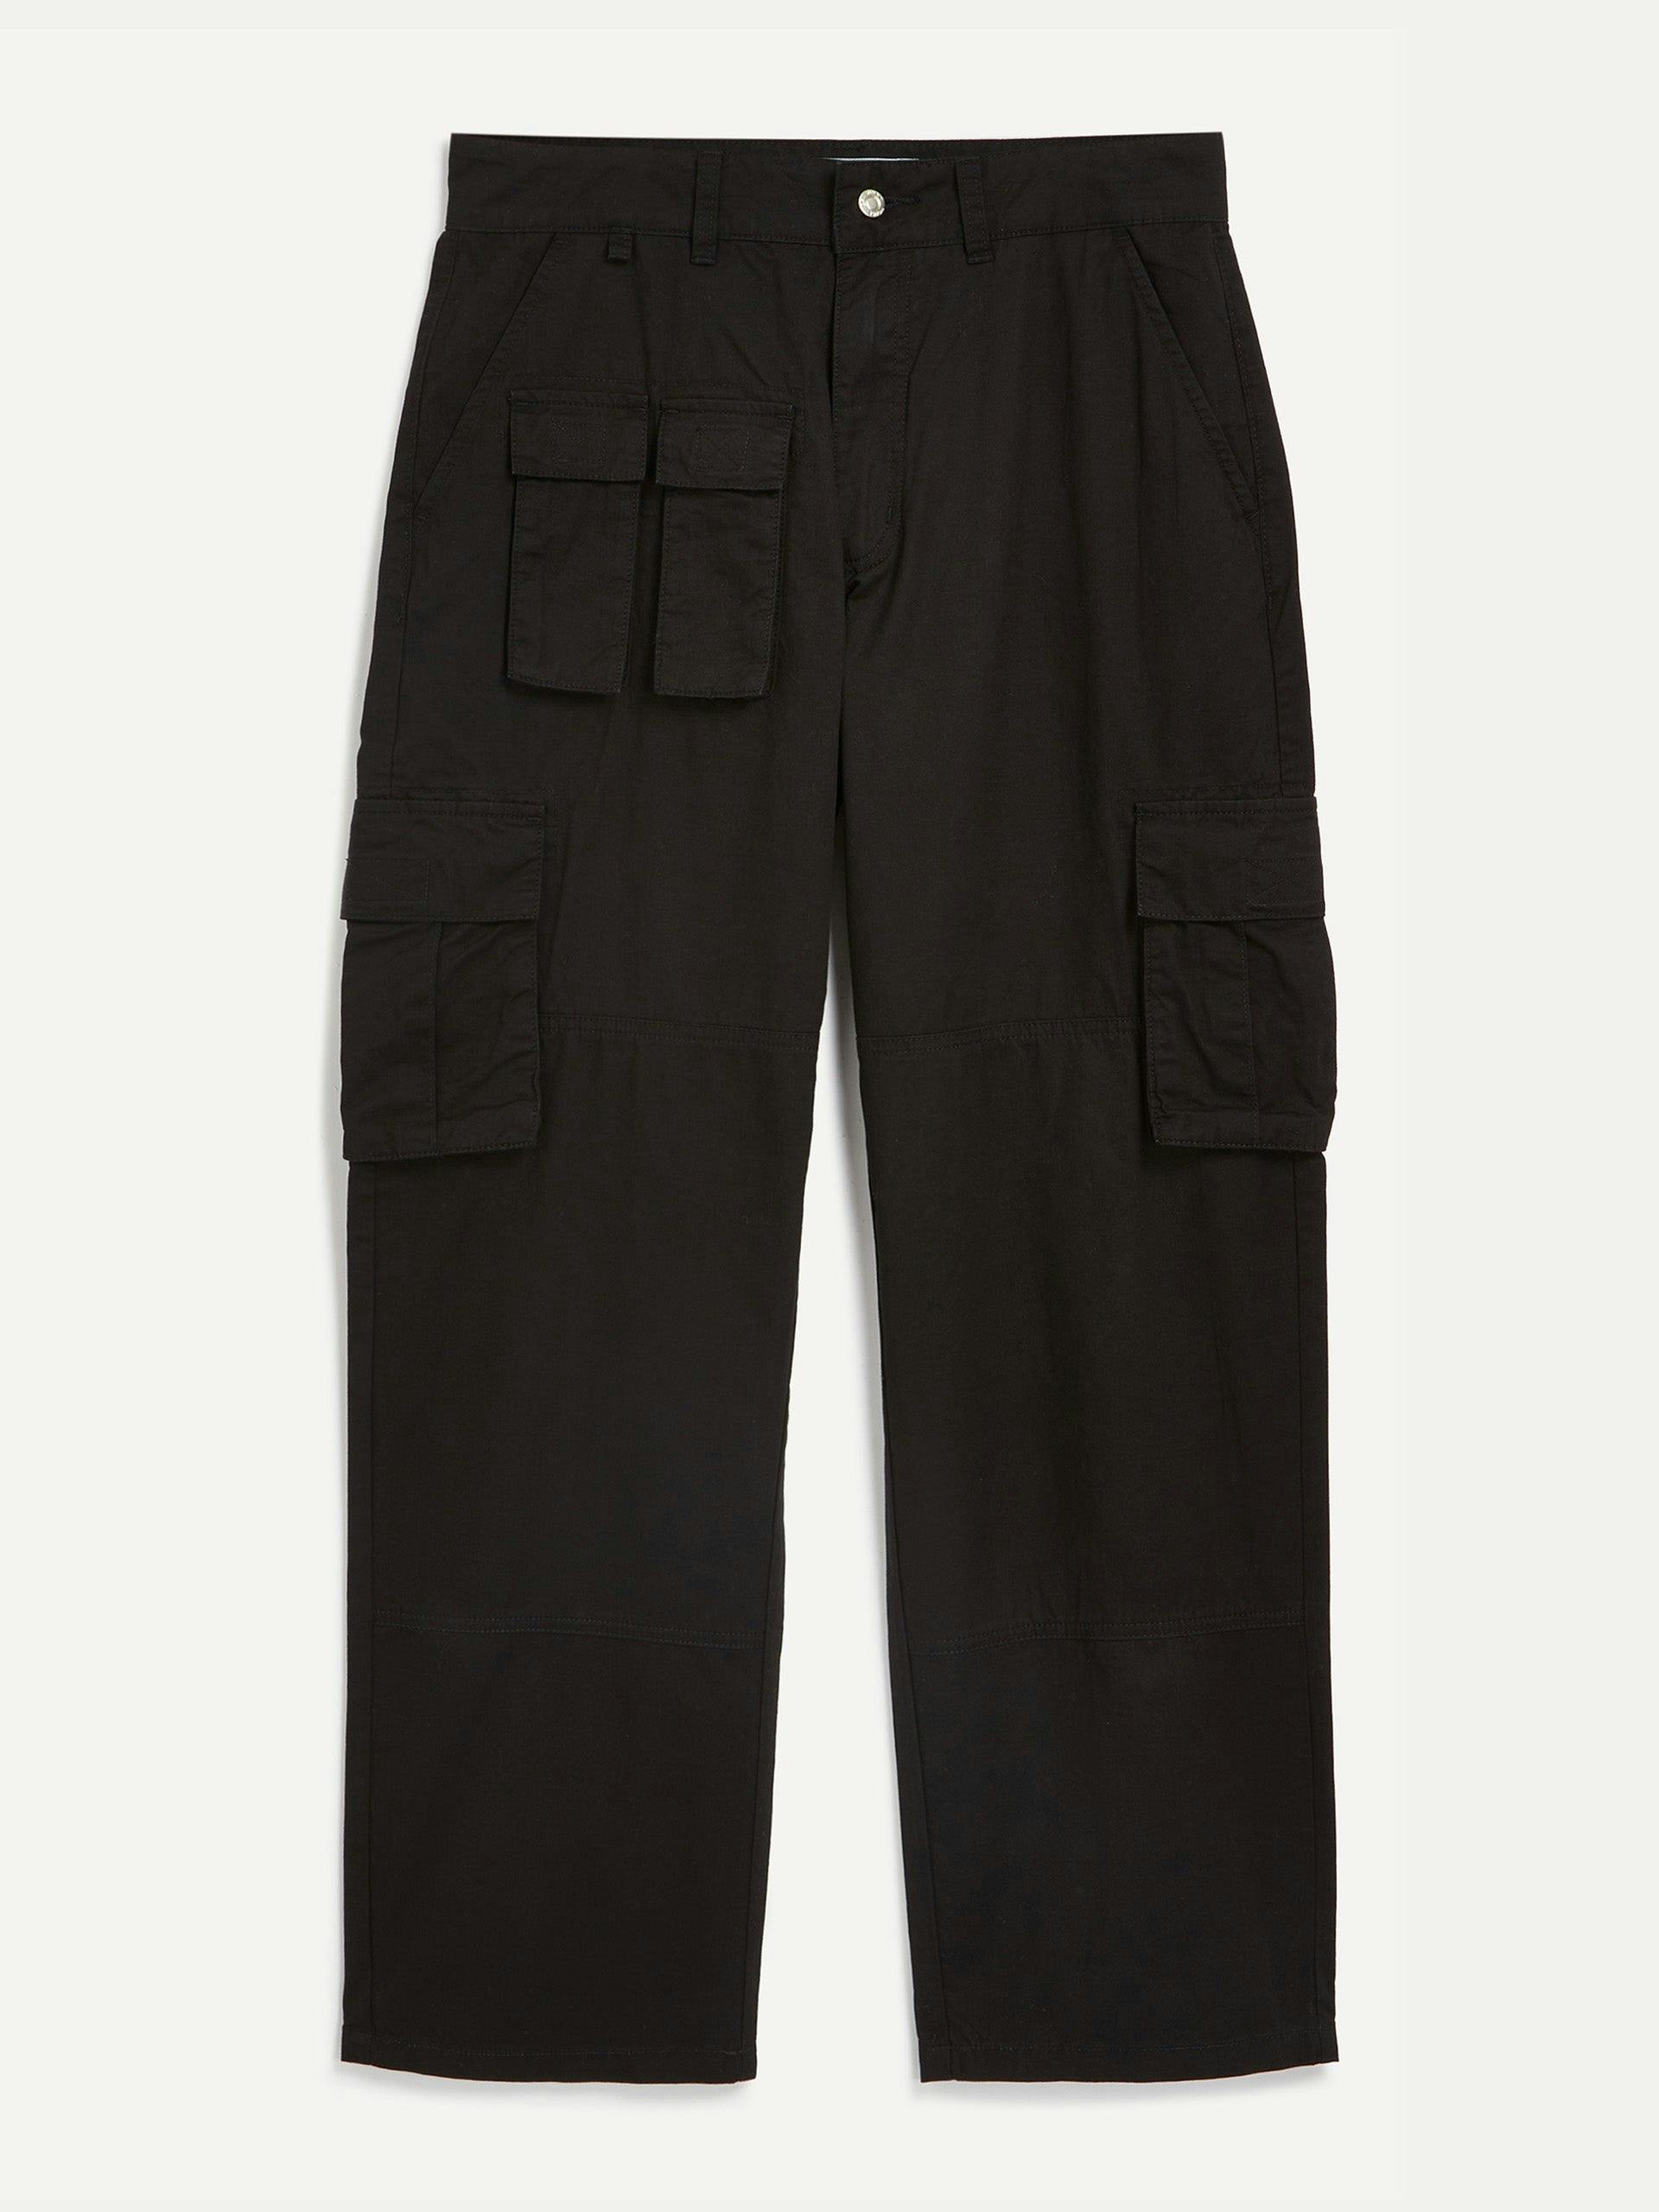 Easy rider cargo trousers